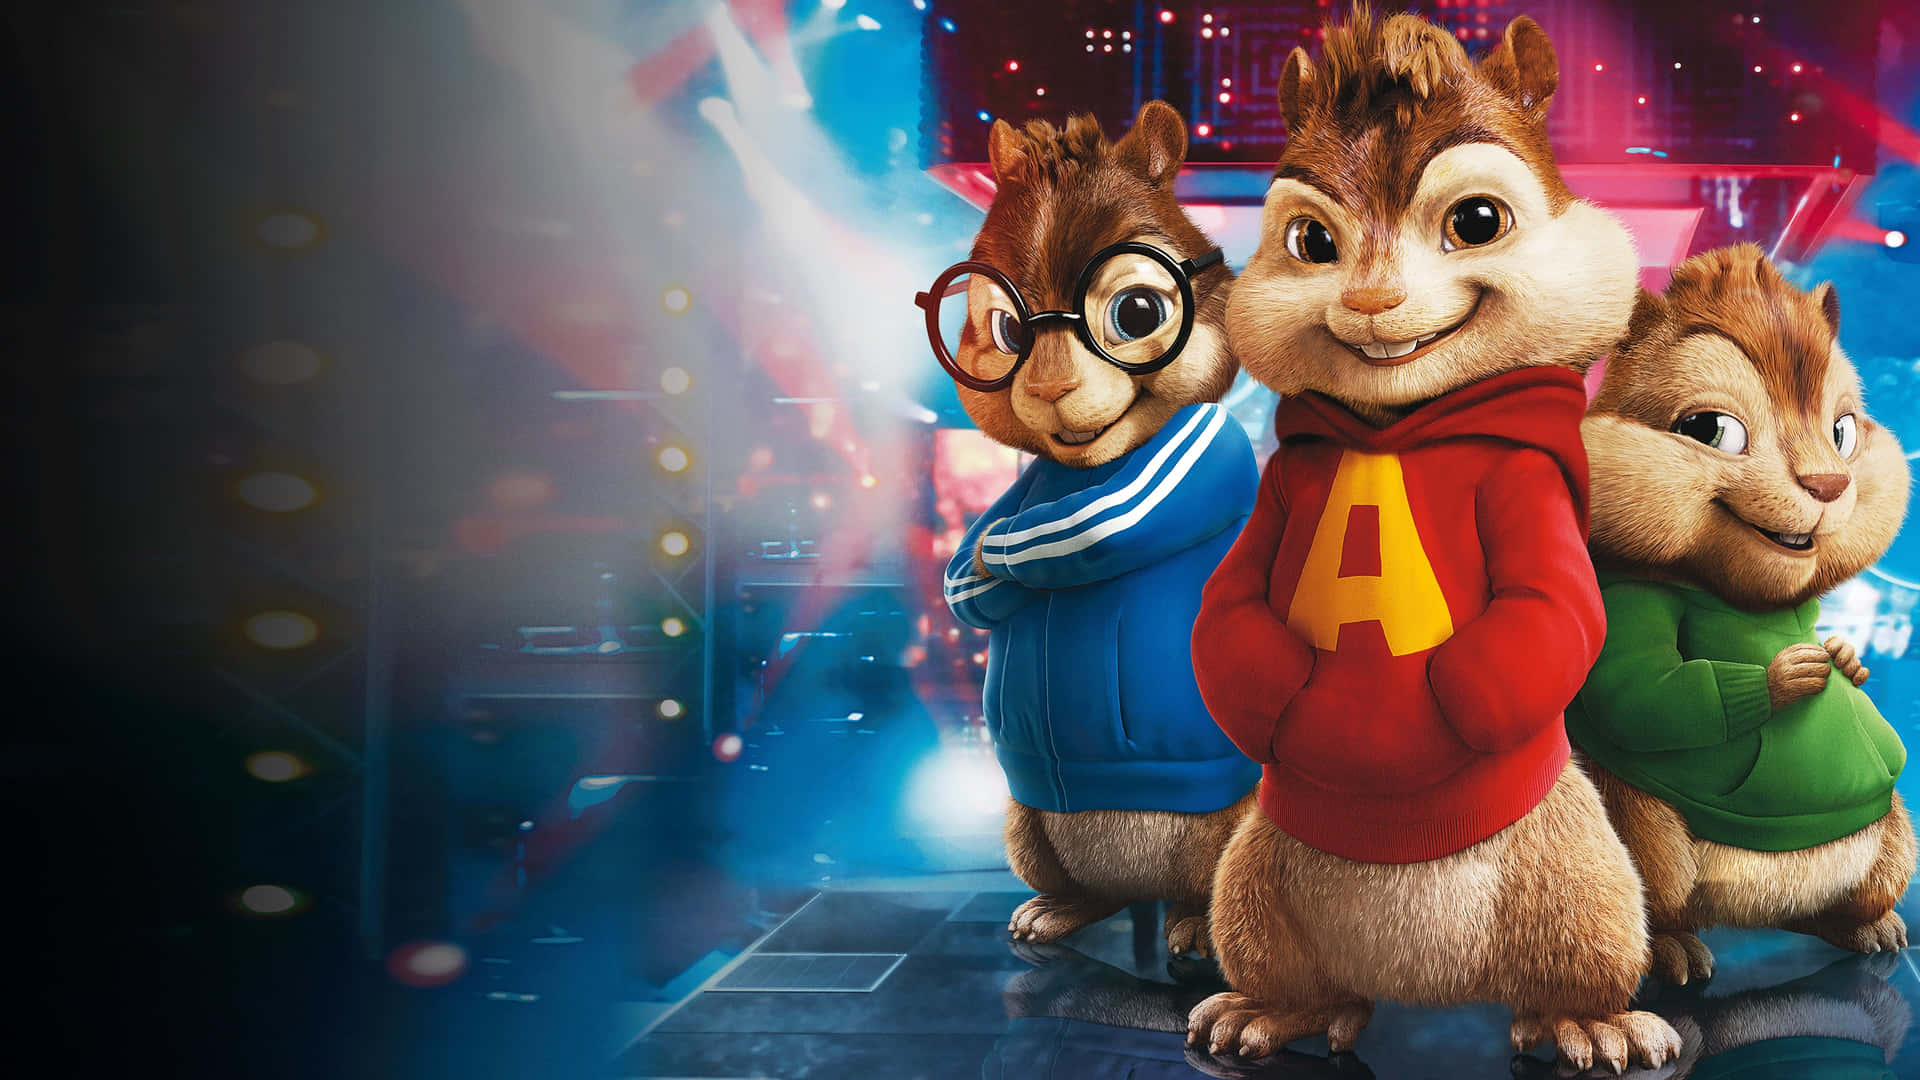 "Alvin and The Chipmunks Rocking Out Their Latest Song"